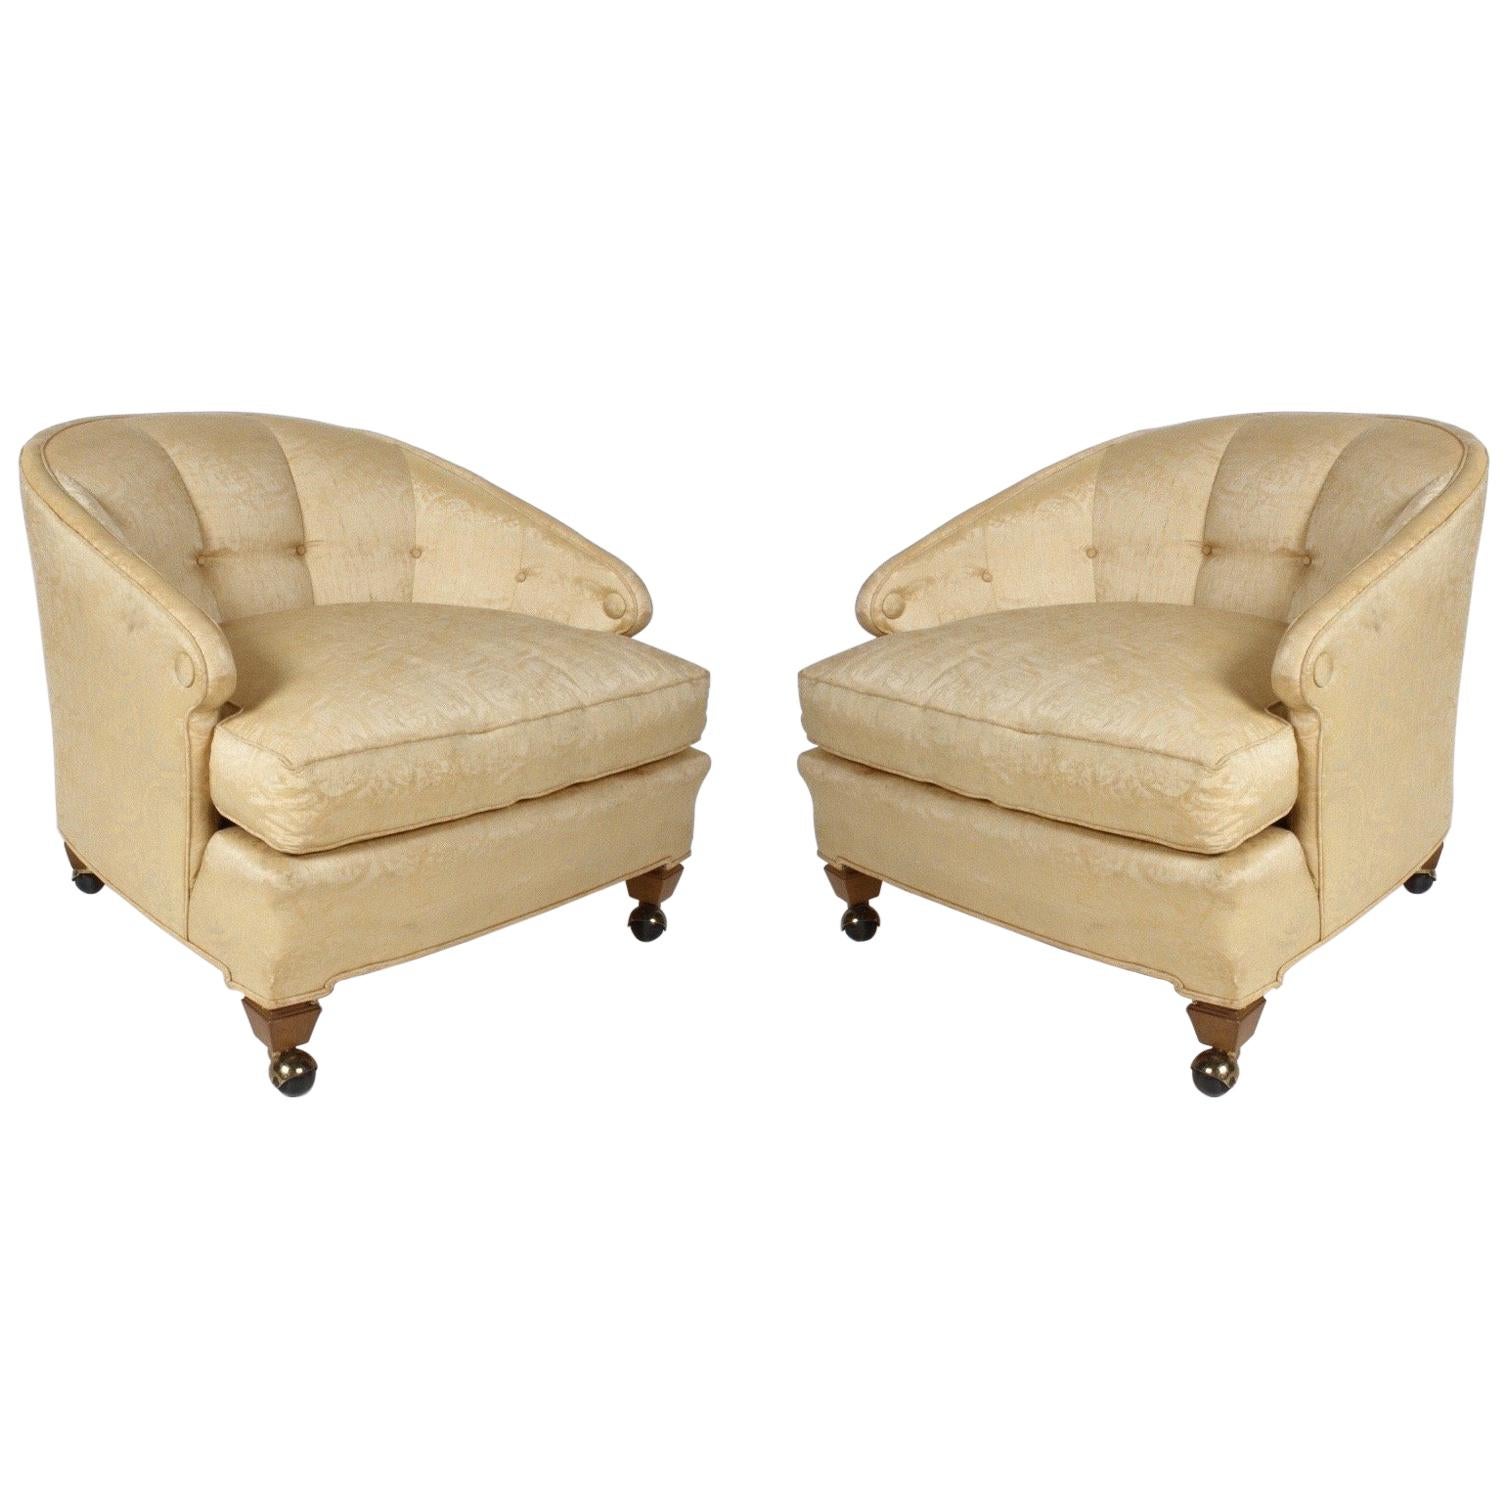 Pair of Hollywood Regency Tomlinson Lounge Chairs on Castors